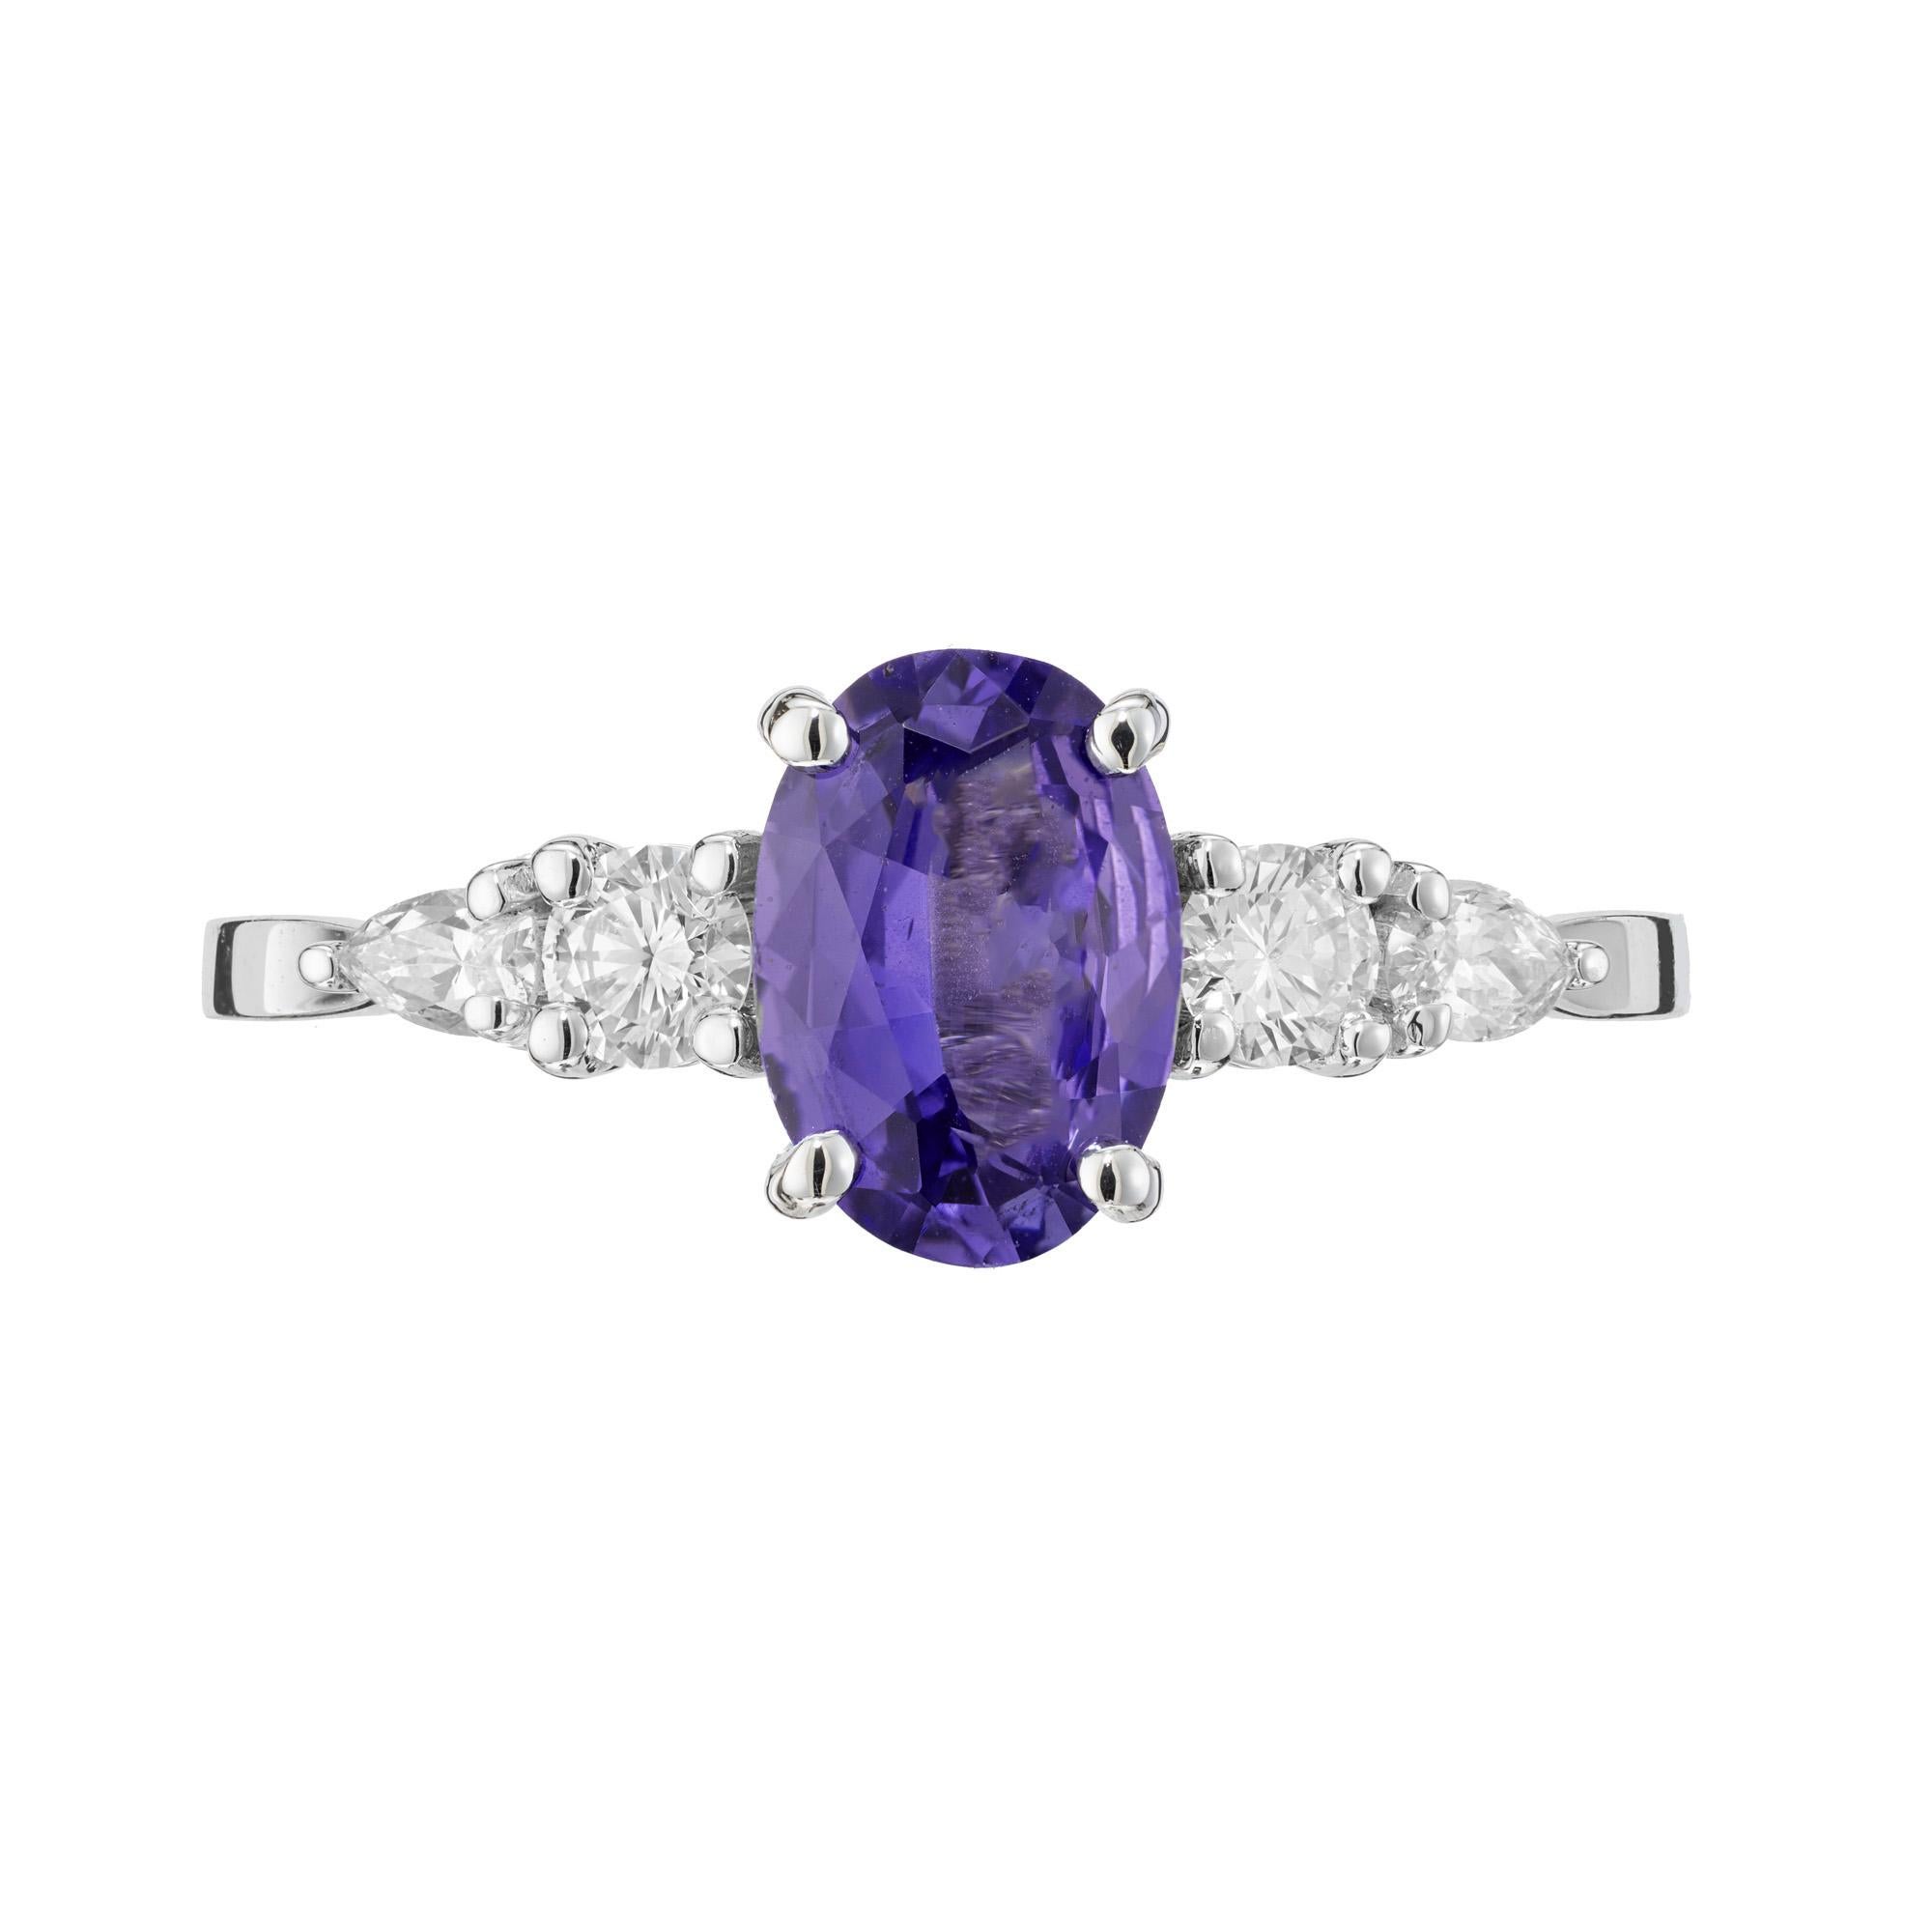 Bright purple oval natural no heat 1.11 carat sapphire in a custom design ring. Designed and crafted in the Peter Suchy Workshop

1 oval purple sapphire, approx. 1.11cts GIA Certificate # 5161215987
2 round brilliant cut diamonds, G-H VS approx.